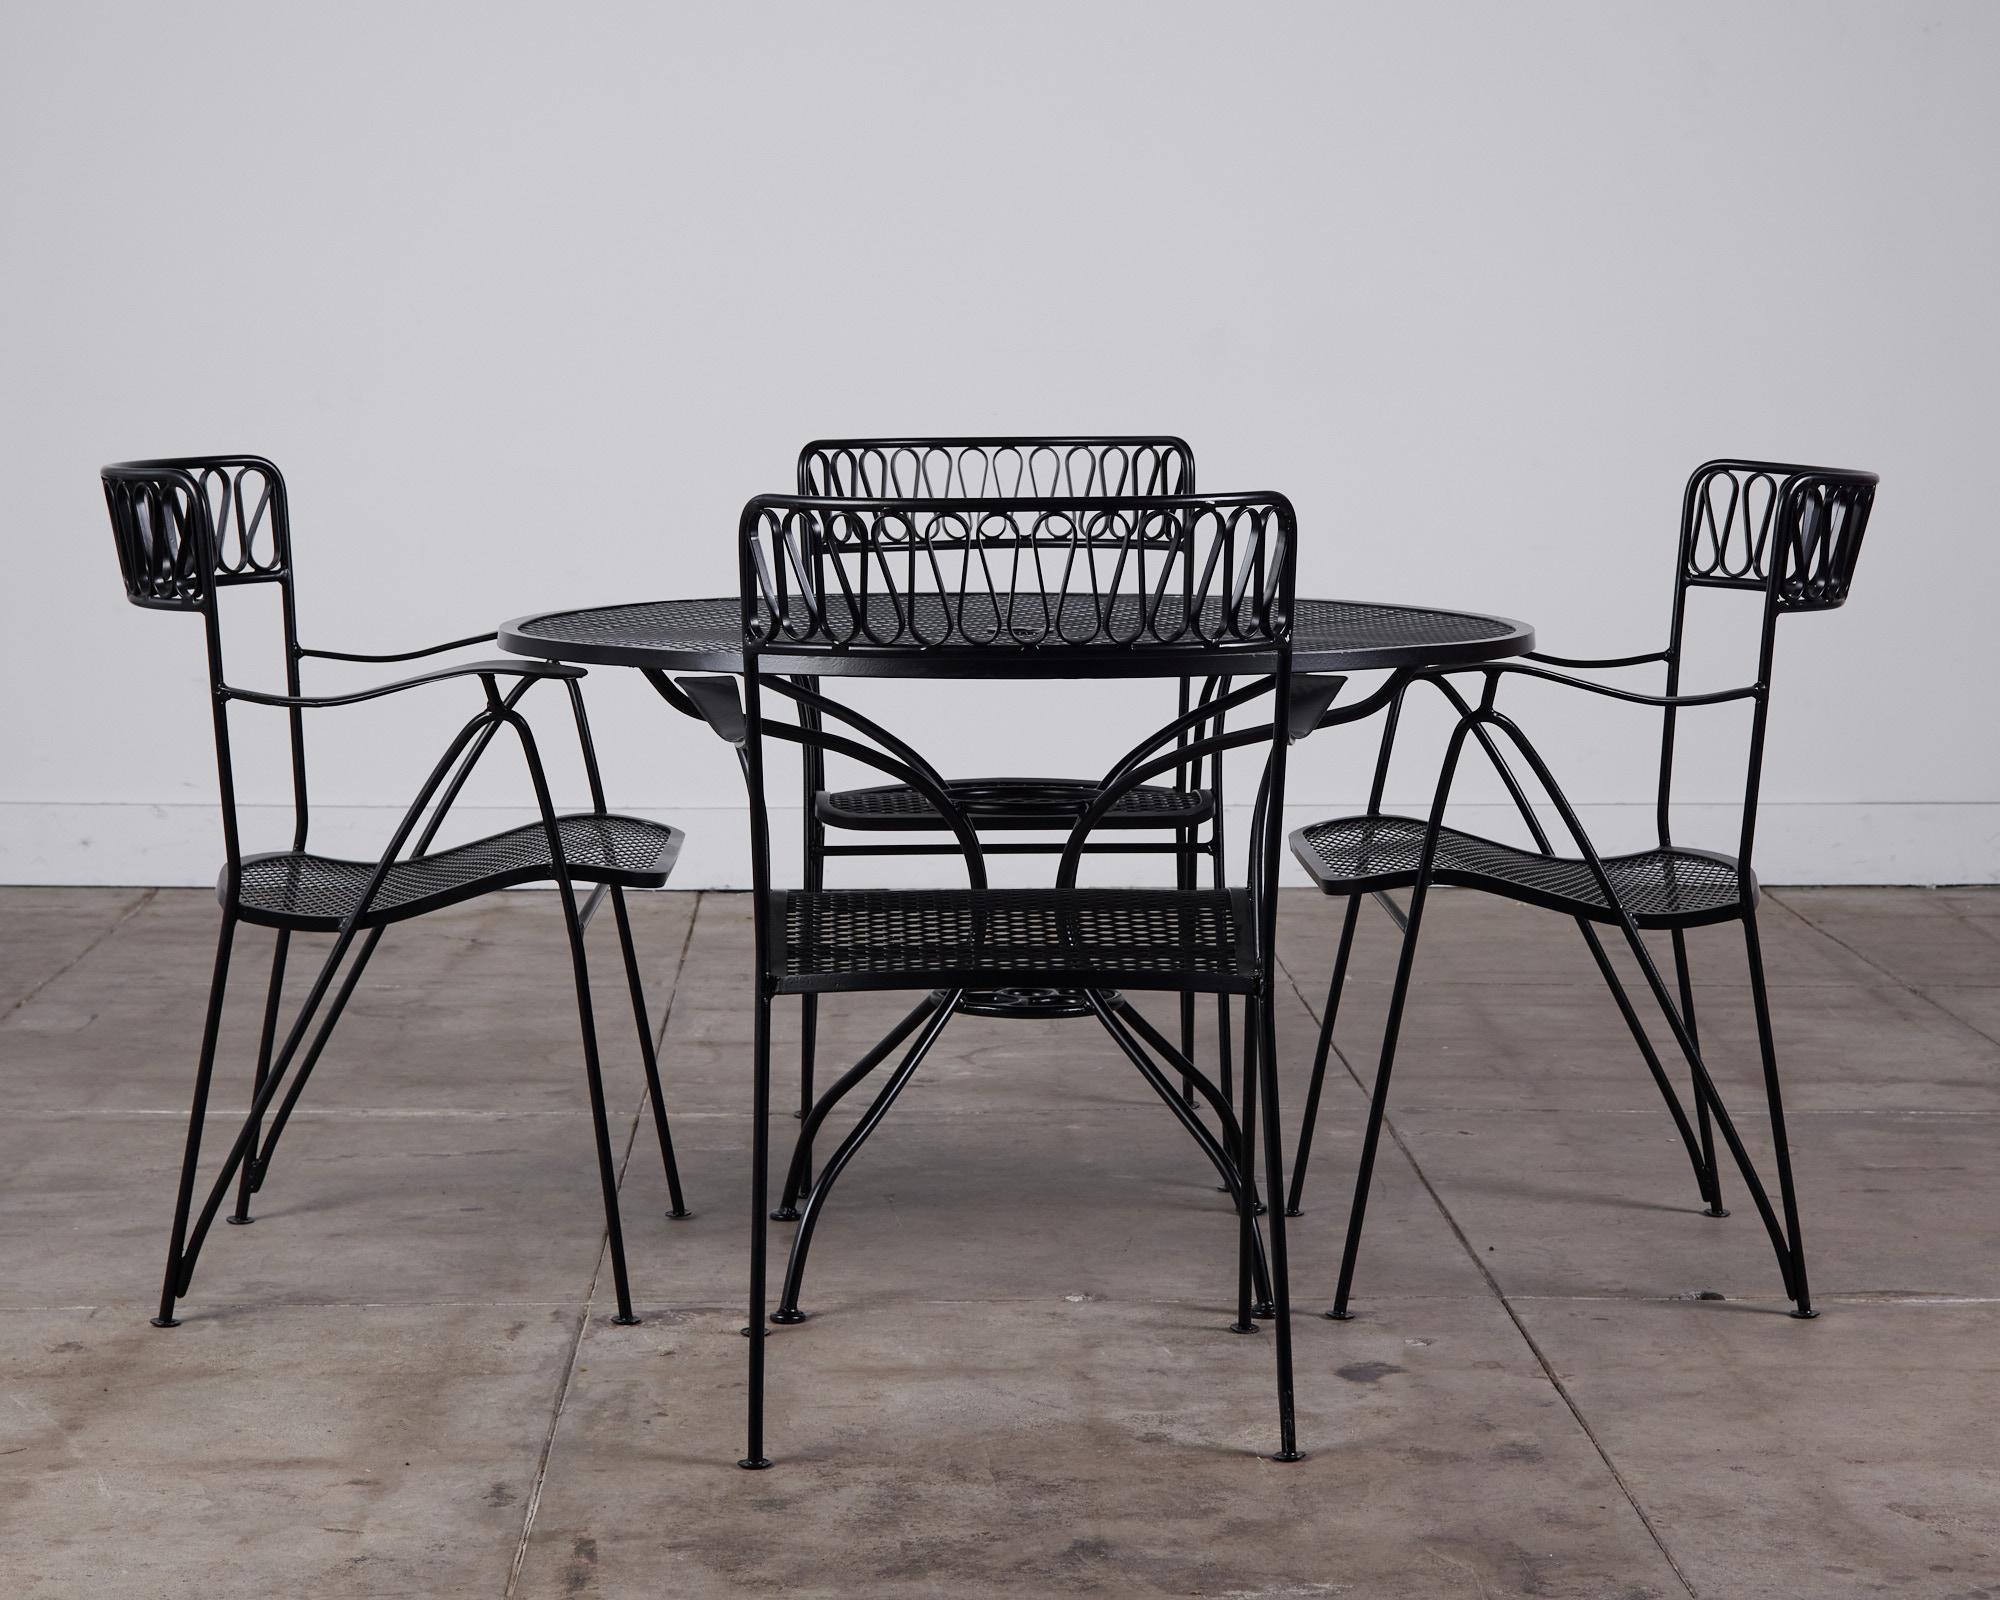 Patio set by Maurizio Tempestini for John Salterini, USA, c.1950s. This set consists of a round dining table and four wrought iron armchairs with a ribbon detail. This set has been fully restored and newly powder coated.

Tempestini was a